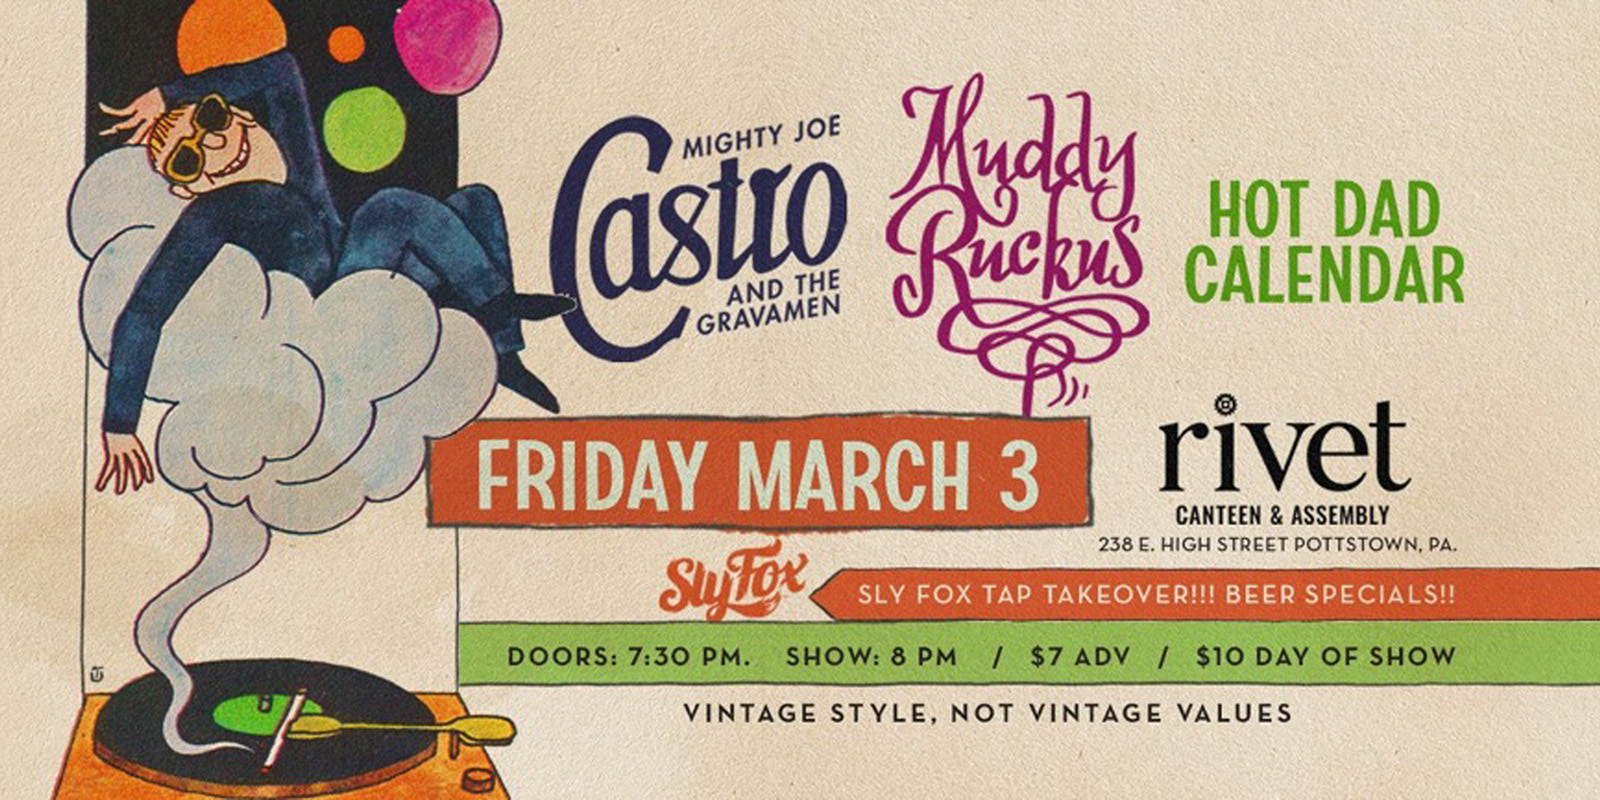 We're joining forces with Sly Fox Beer to bring you the return of 3 of our favorite original acts to the Rivet: Canteen & Assembly stage. Mighty Joe Castro & The Gravamen, Muddy Ruckus, and Hot Dad Calendar on Friday, March 3rd, 2023! Be there!